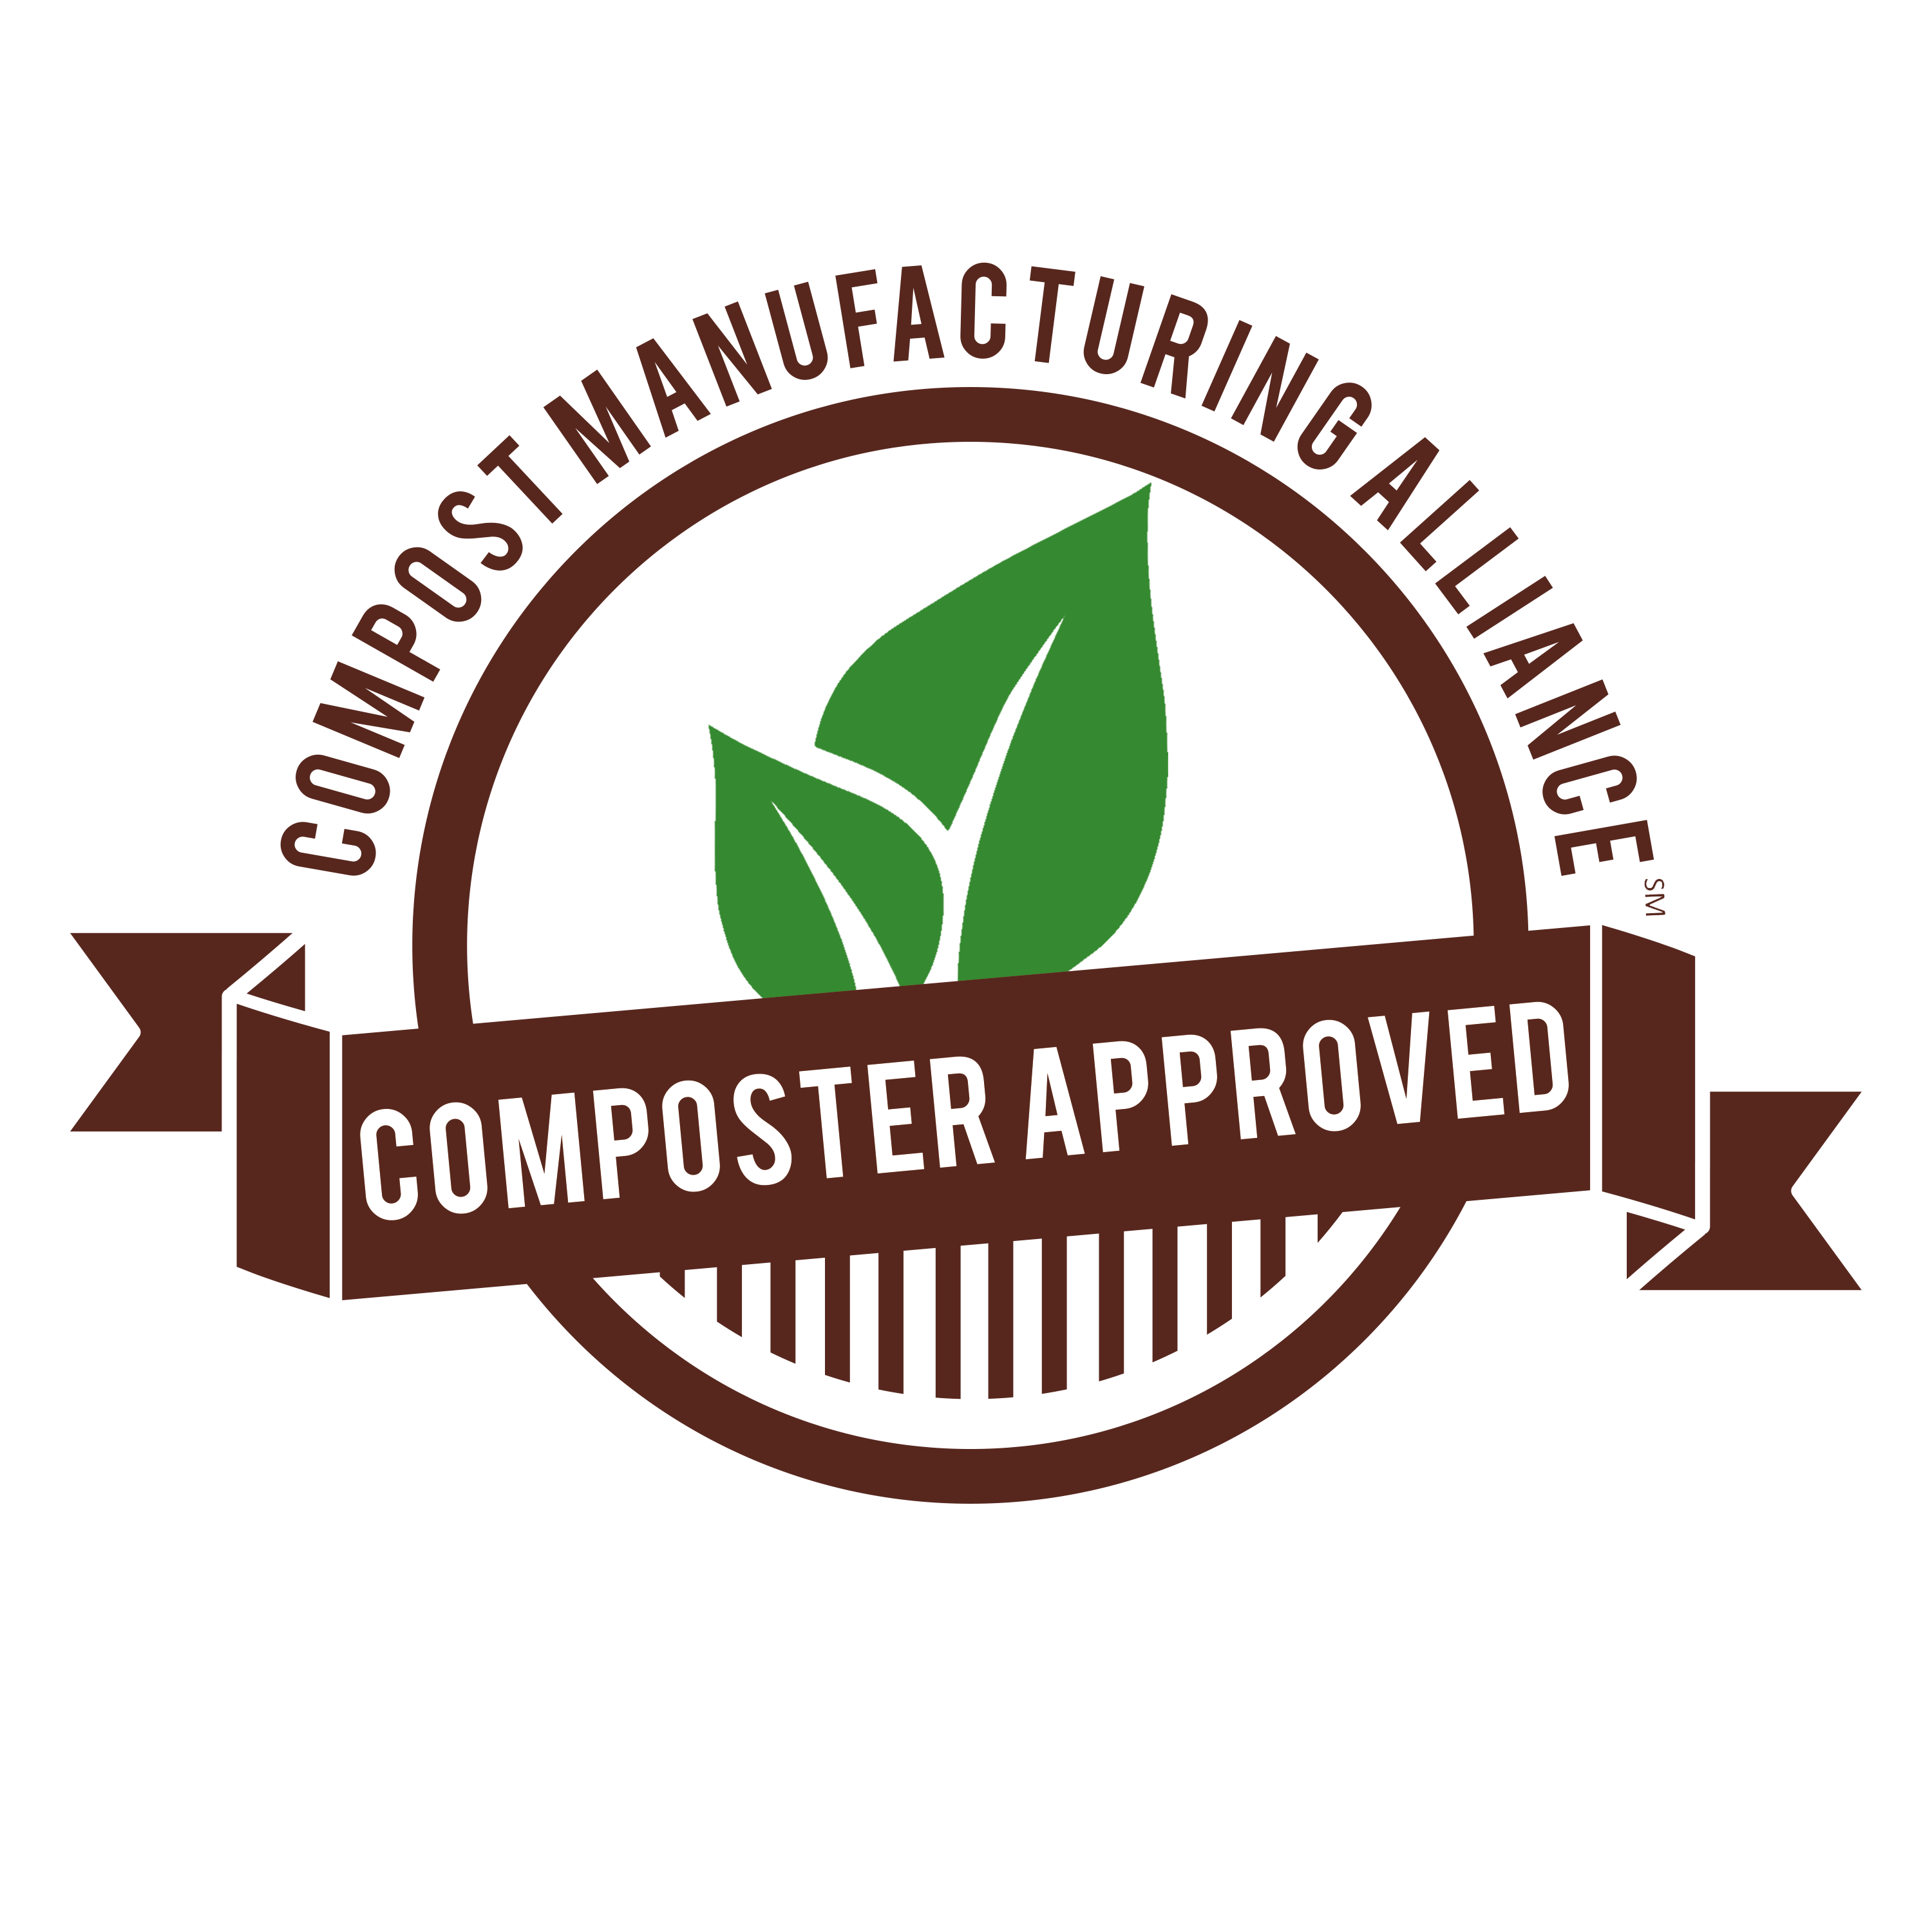 Composting Logo - Compost Manufacturing Alliance – Composter Approved